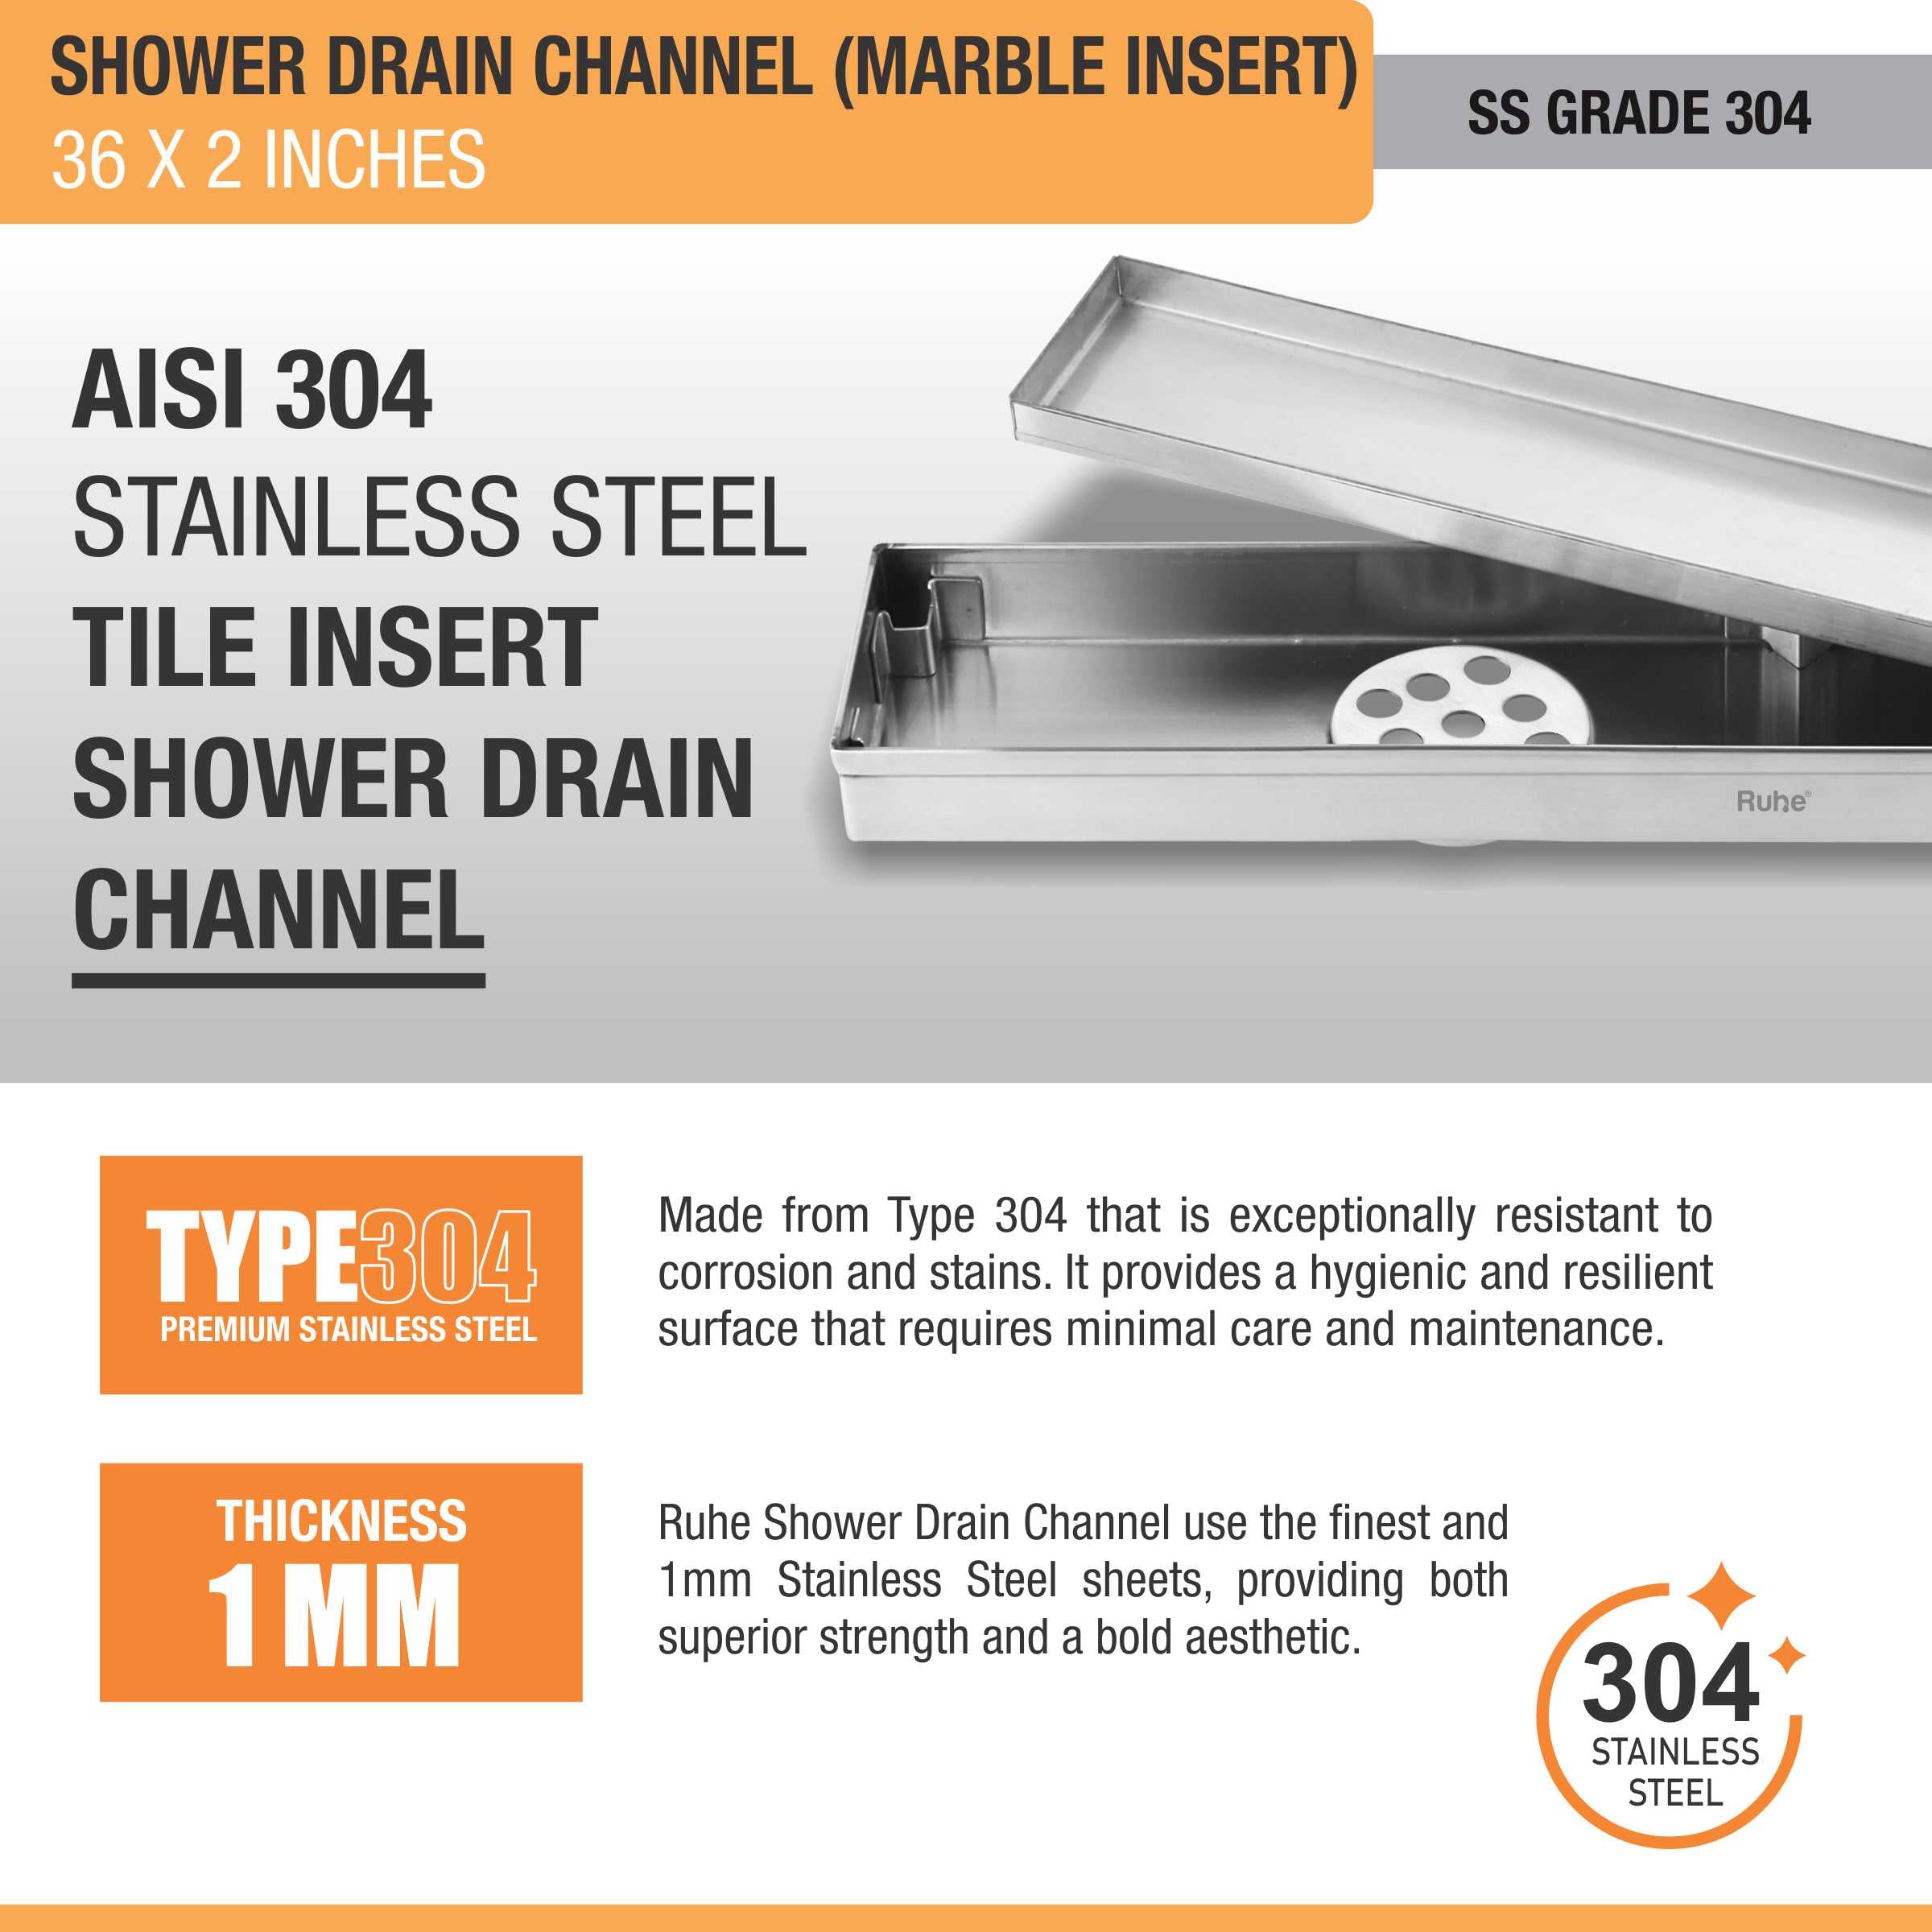 Marble Insert Shower Drain Channel (36 x 2 Inches) (304 Grade) stainless steel